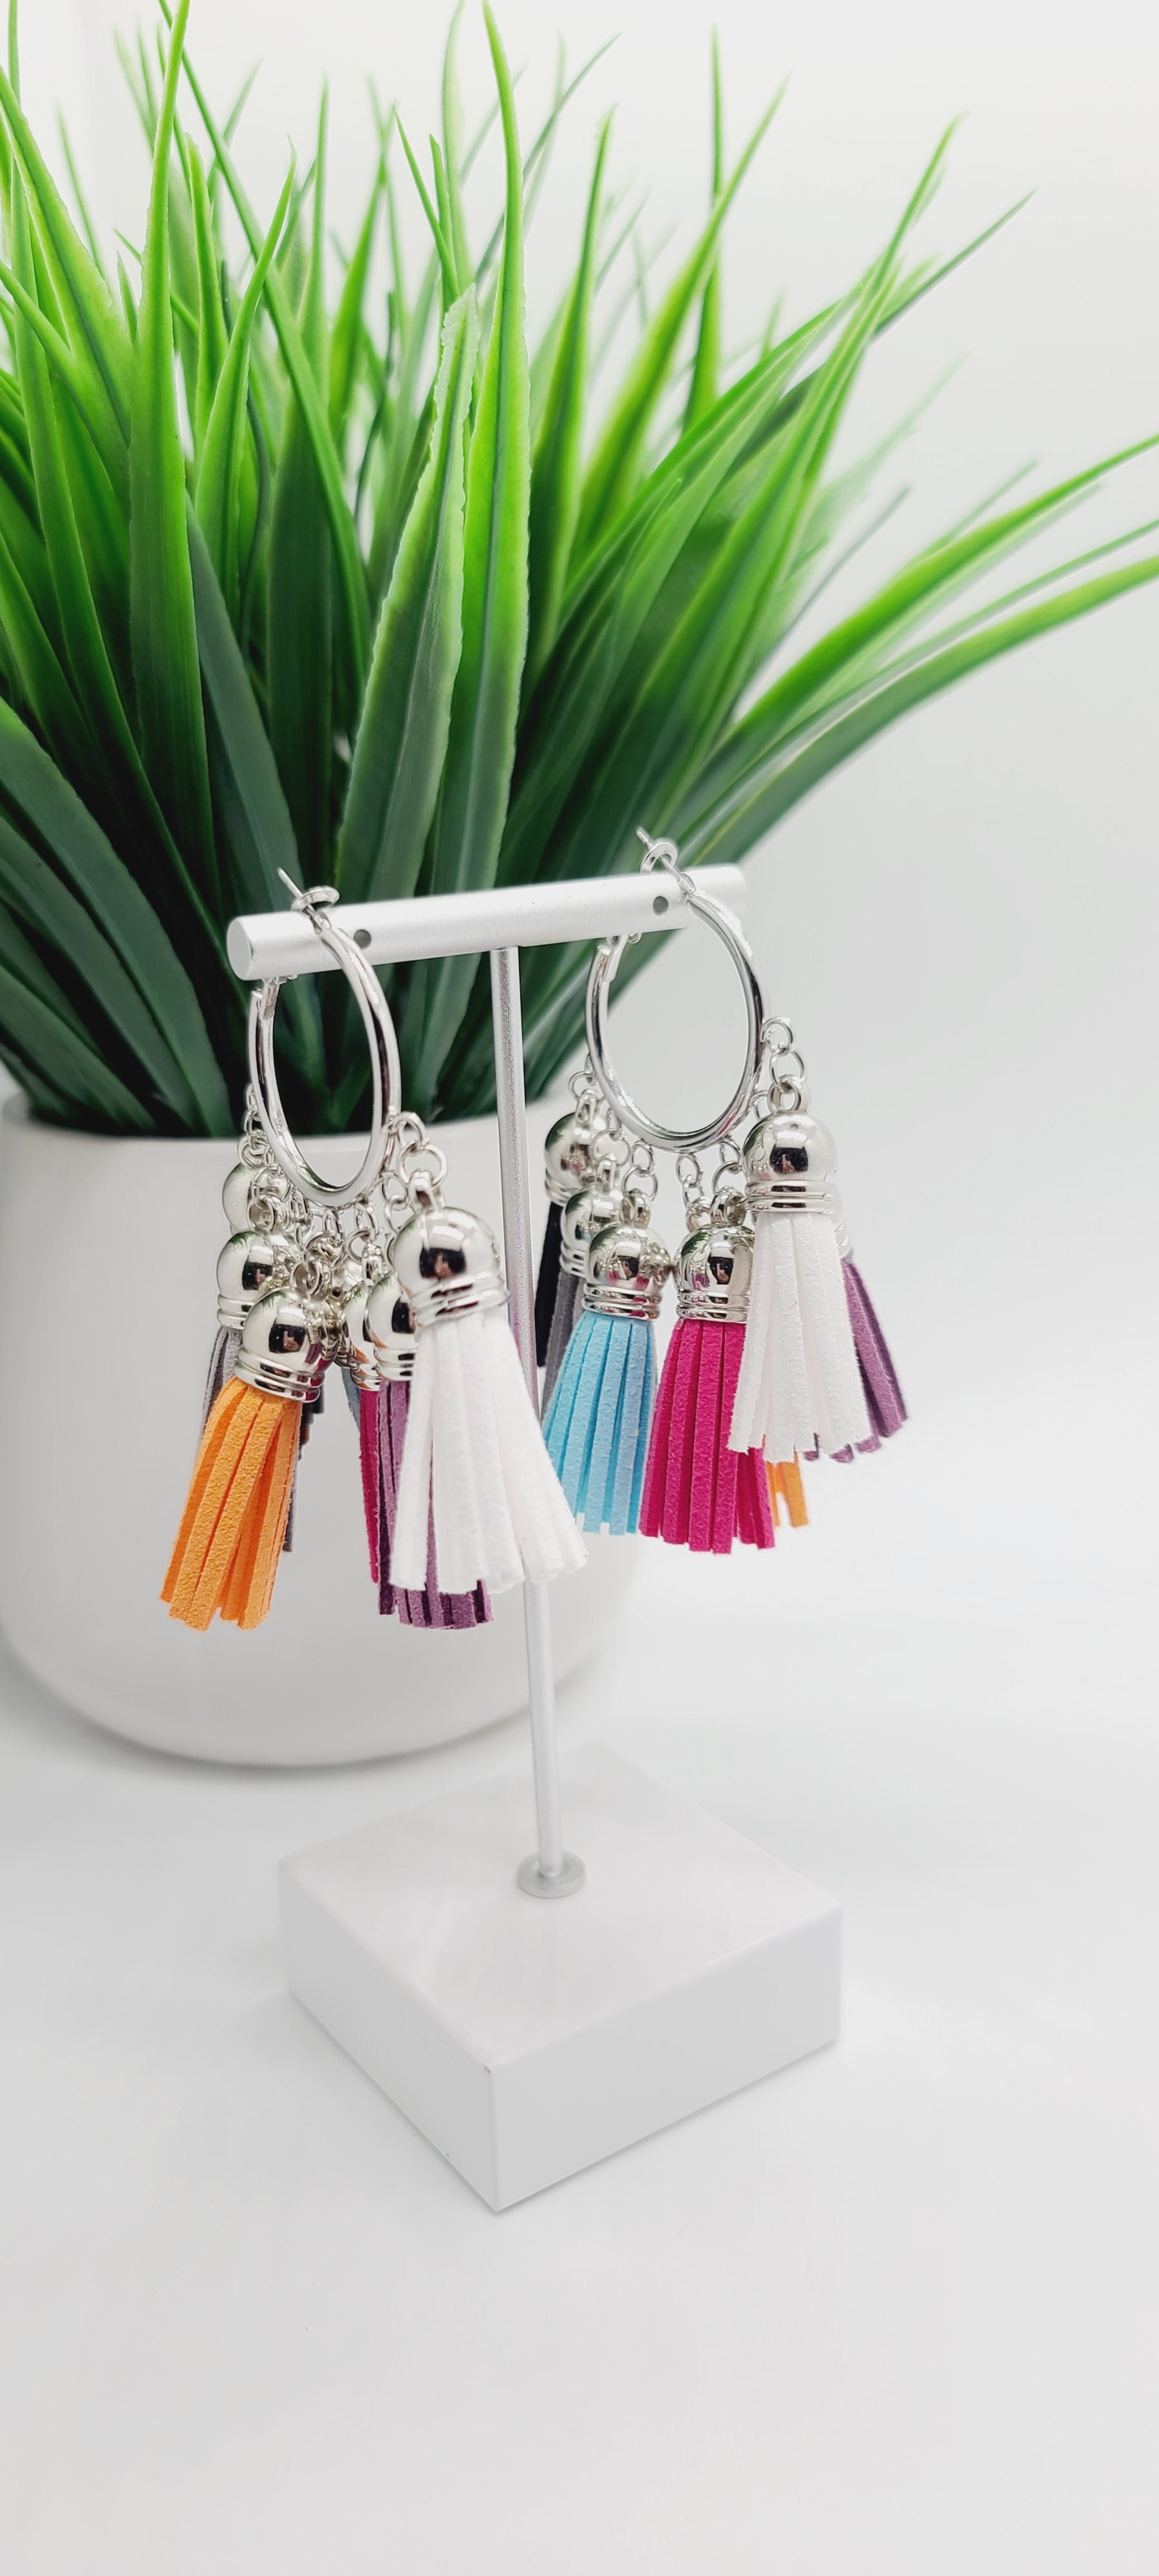 Length: 3 inches | Weight: 0.8 ounces  Distinctly You! These earrings are made with small silver hoop, five faux suede colorful tassels.